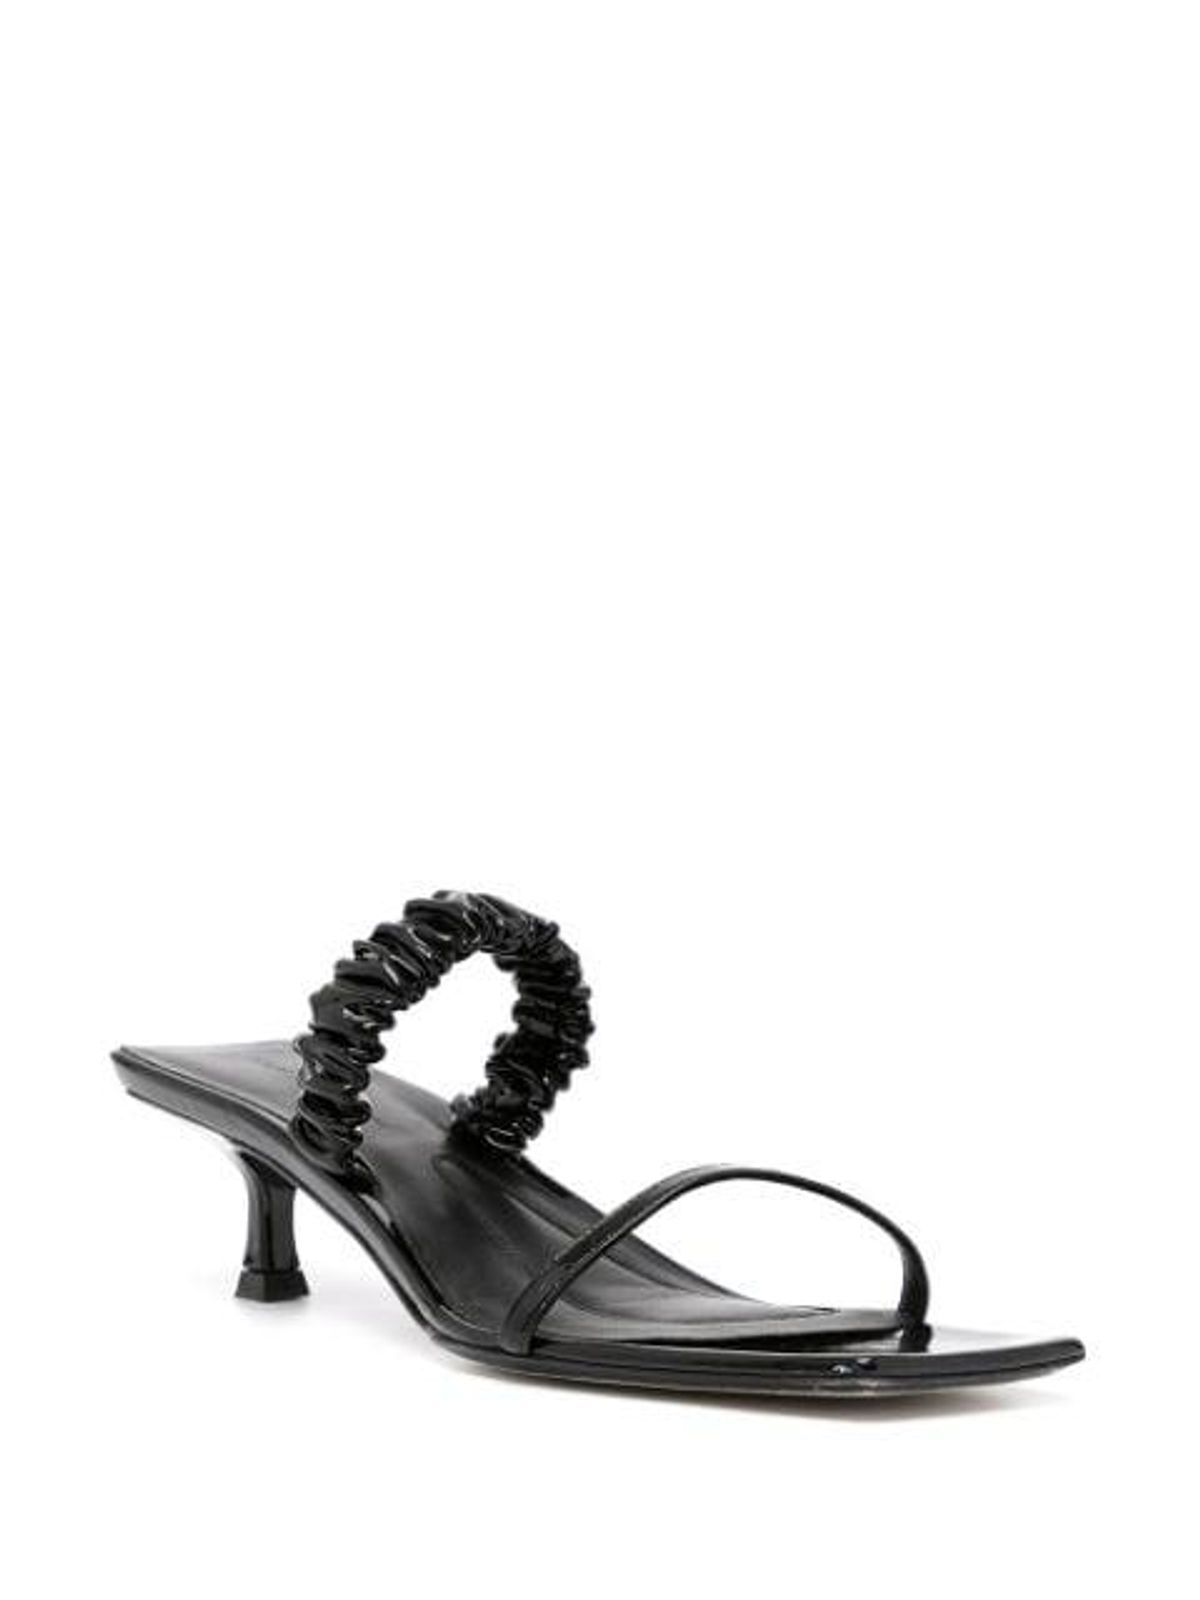 Ruched Square Toe Sandals